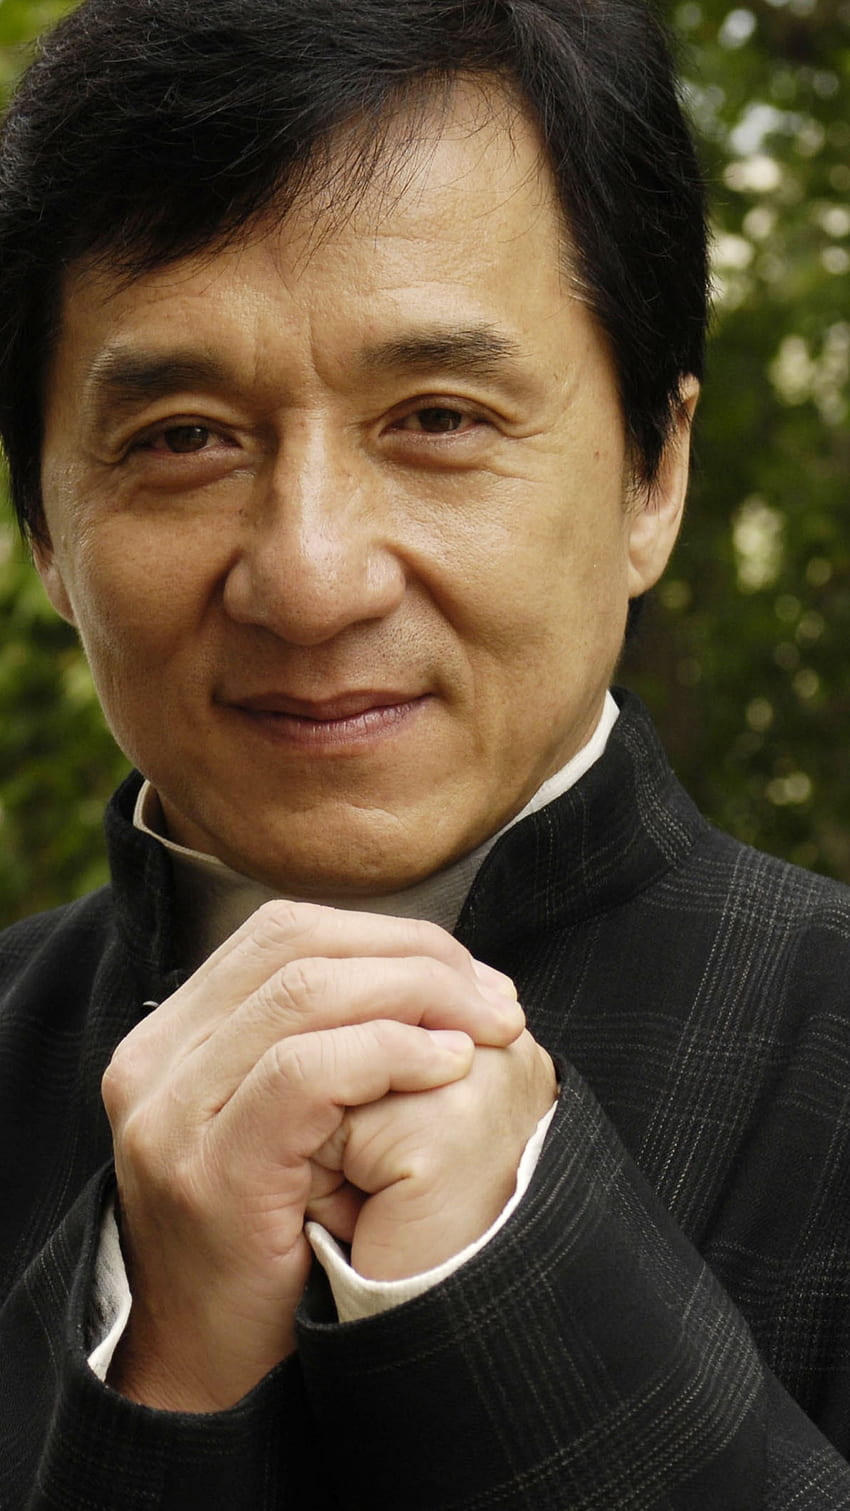 About Jackie Chan Wallpapers HD Google Play version   Apptopia